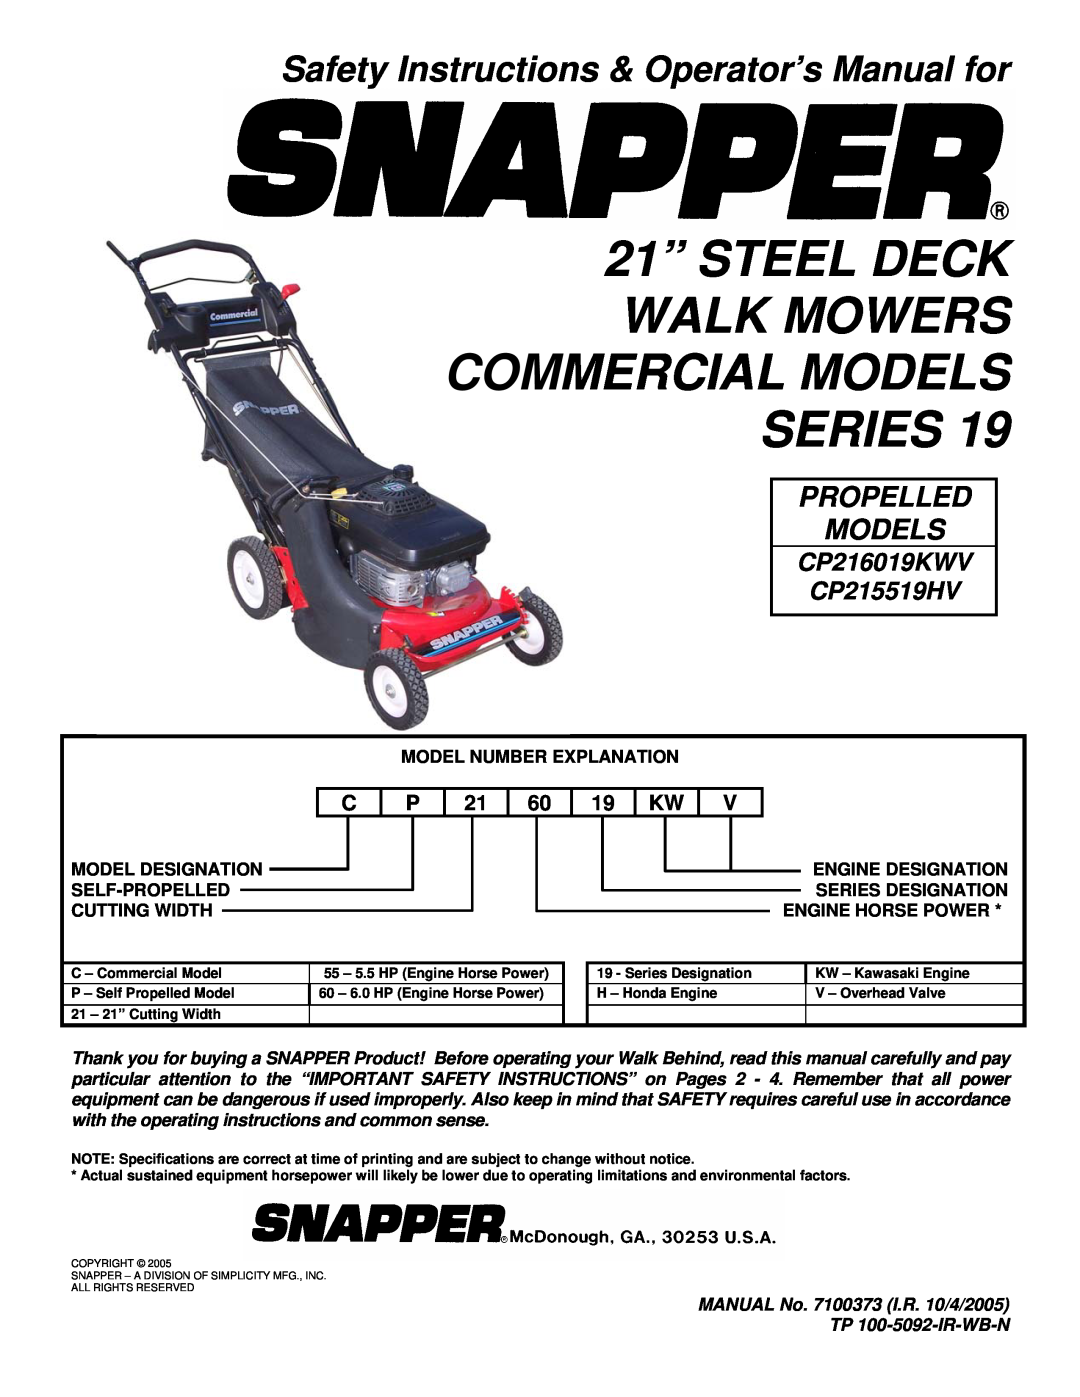 Snapper CP215019KW, CP215519HV important safety instructions 21” STEEL DECK WALK MOWERS COMMERCIAL MODELS SERIES 